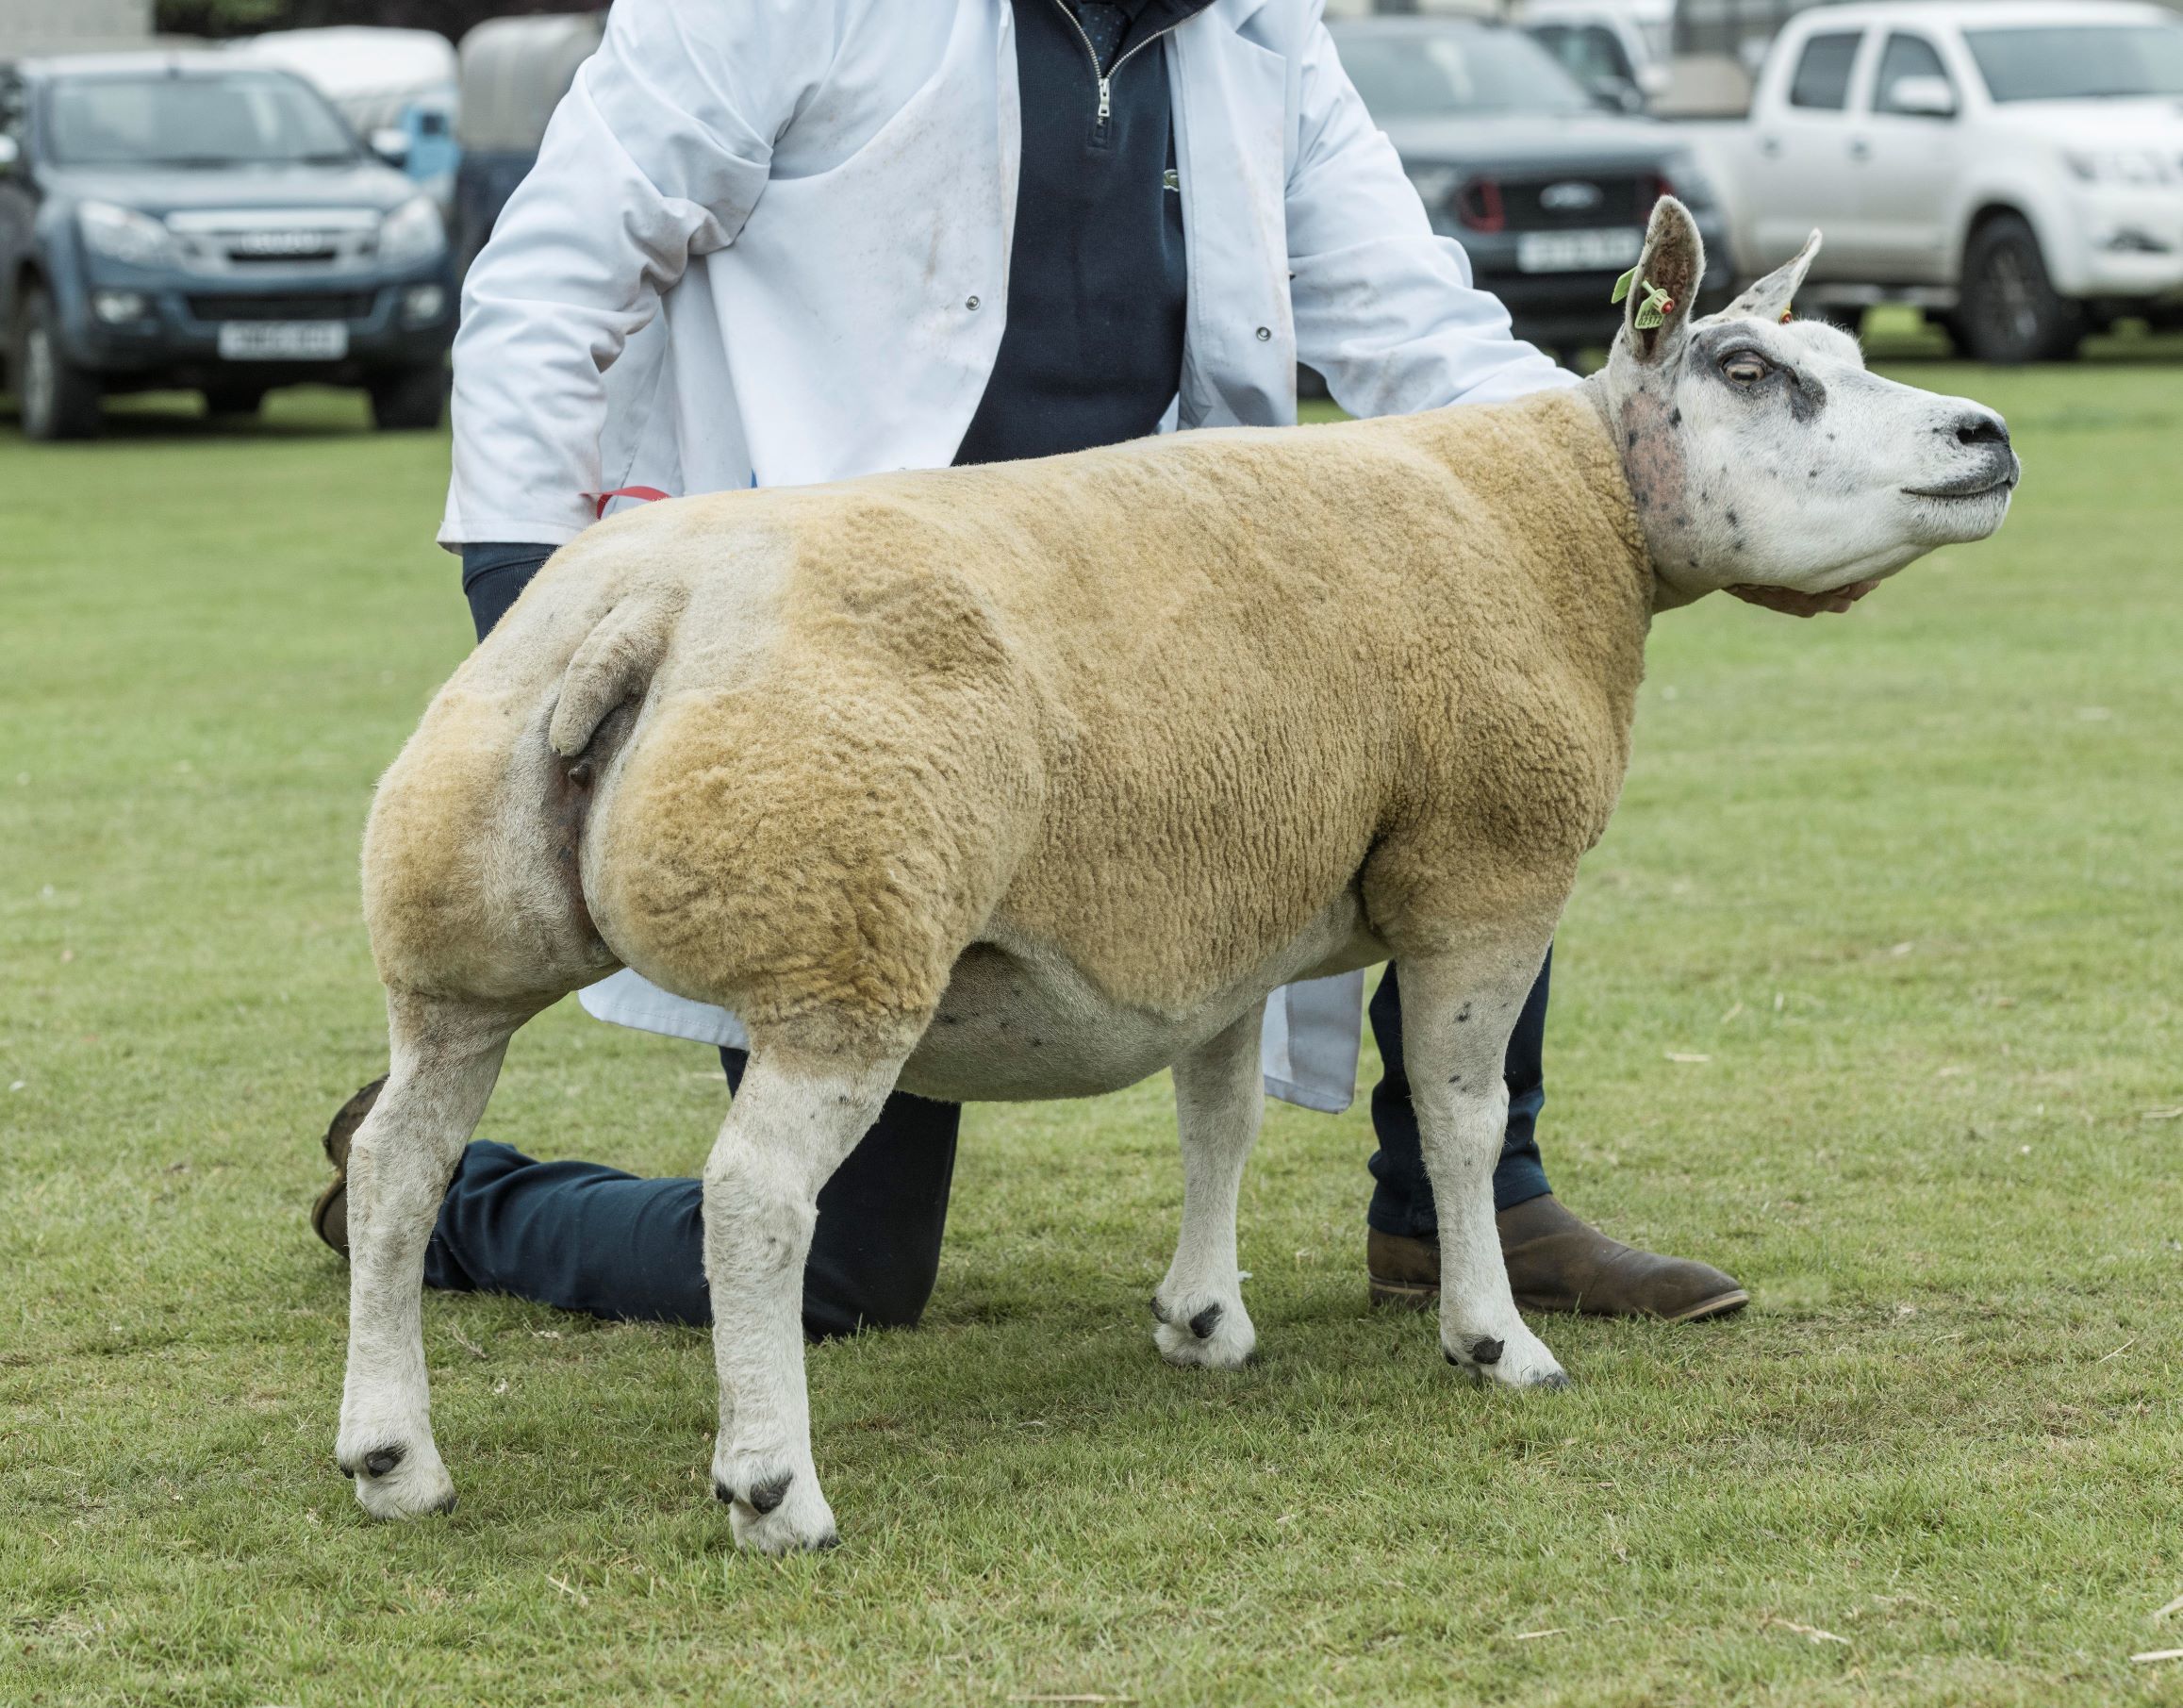 Sinclairs Daisy the Beltex supreme from Alan Miller was reserve overall sheep